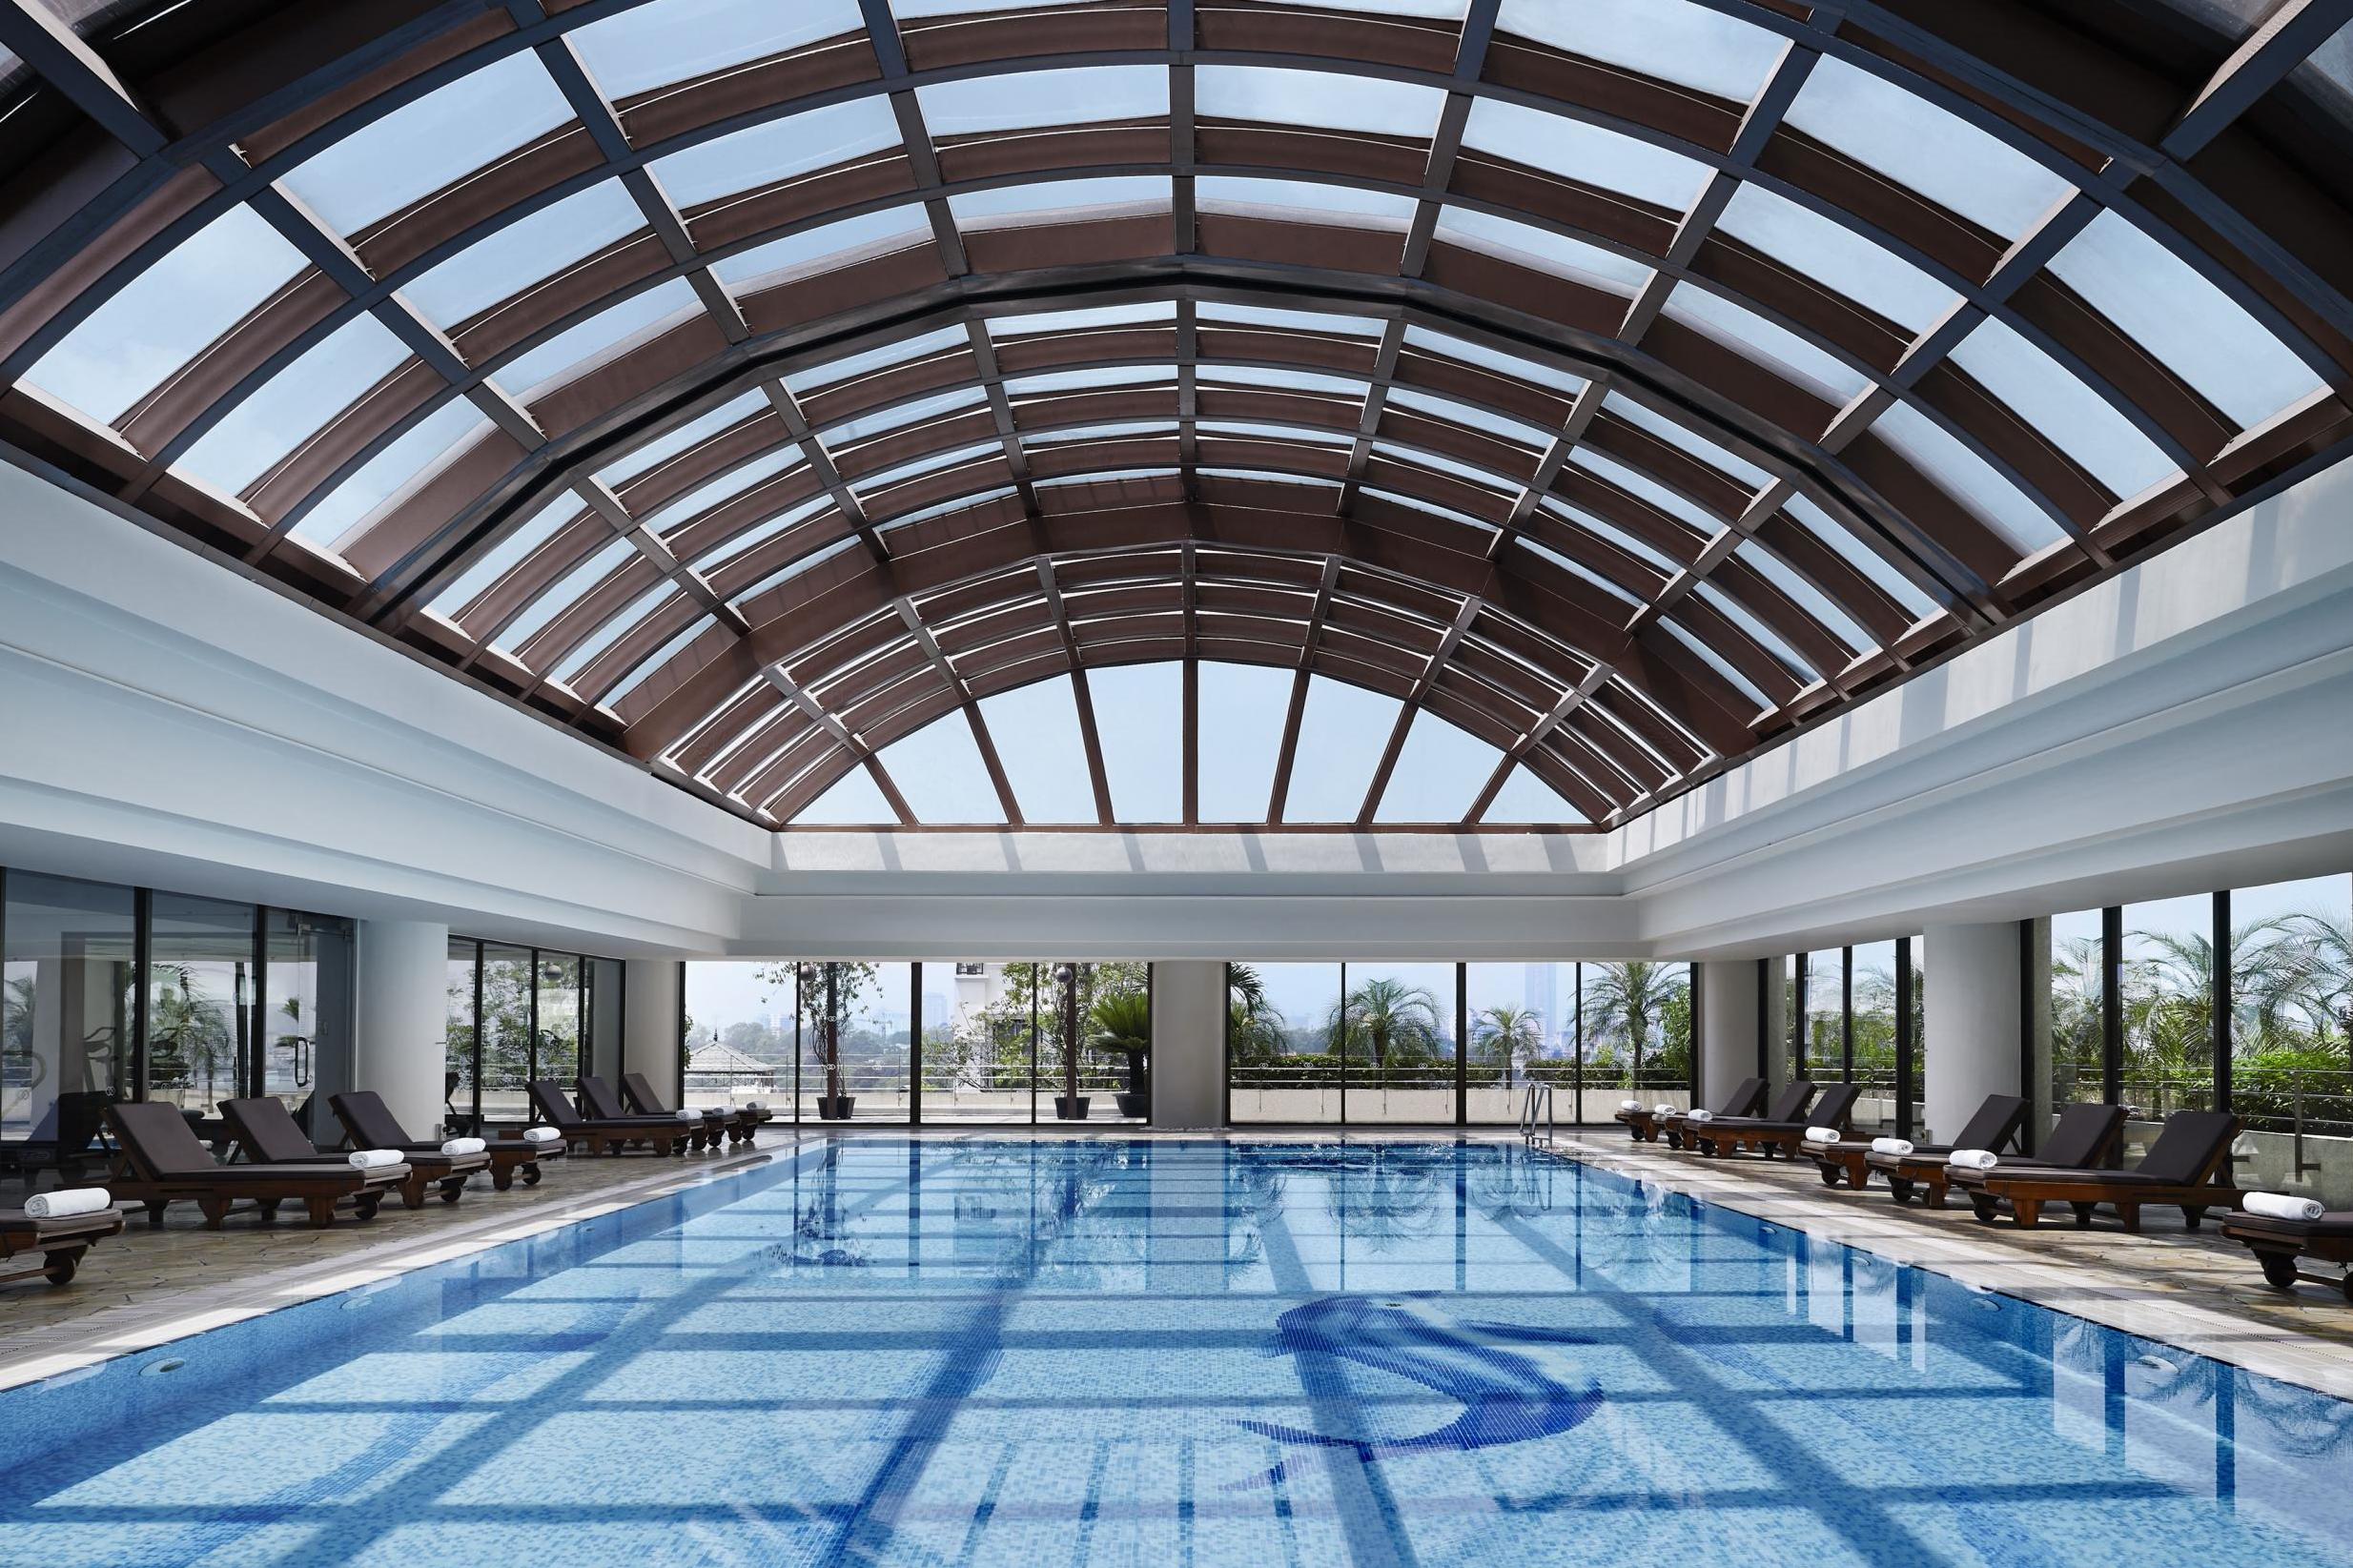 The Pan Pacific's all-season pool has a retractable roof for sunny days